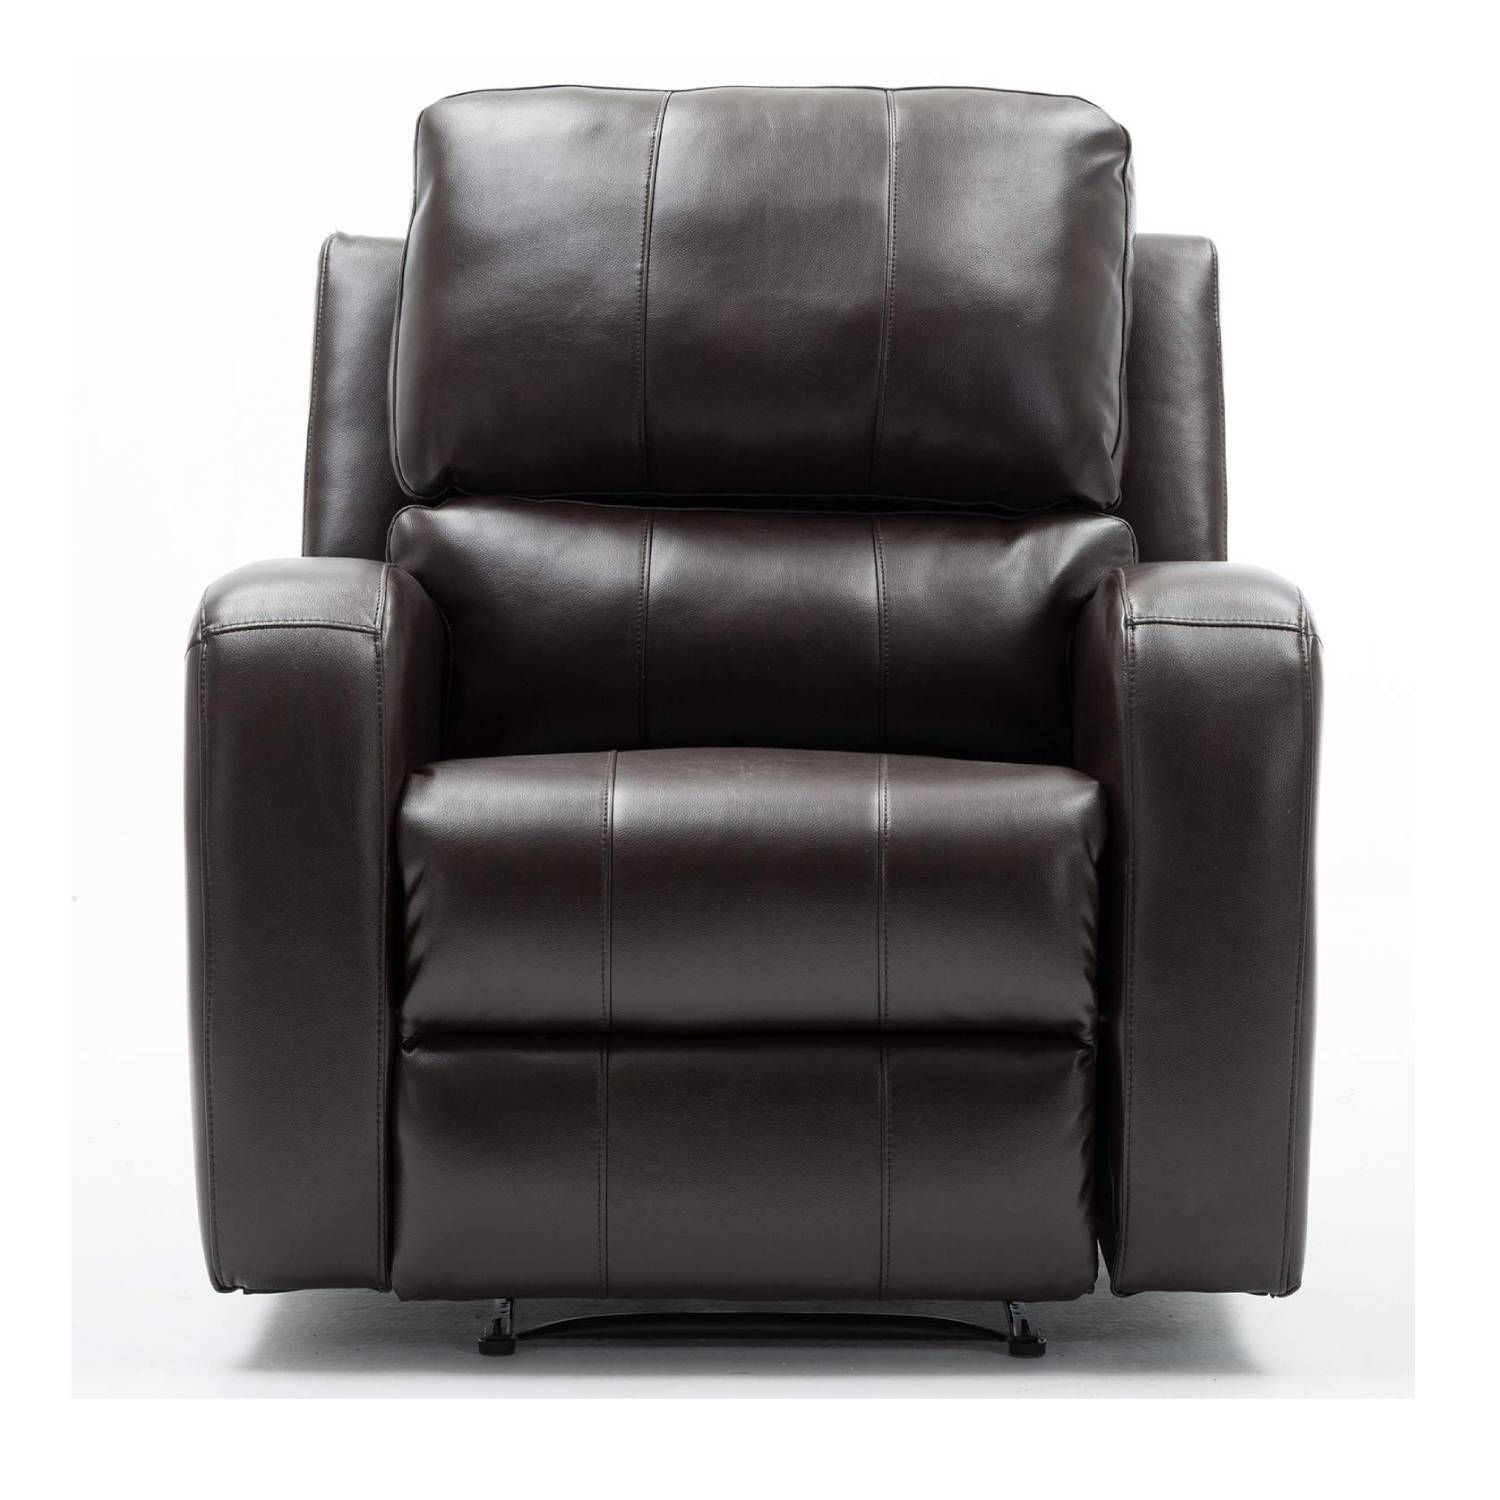 Power recliner-comfortable air leather recliner-Power recliner with USB charging port-home theater seat full of things brown-Boyel Living